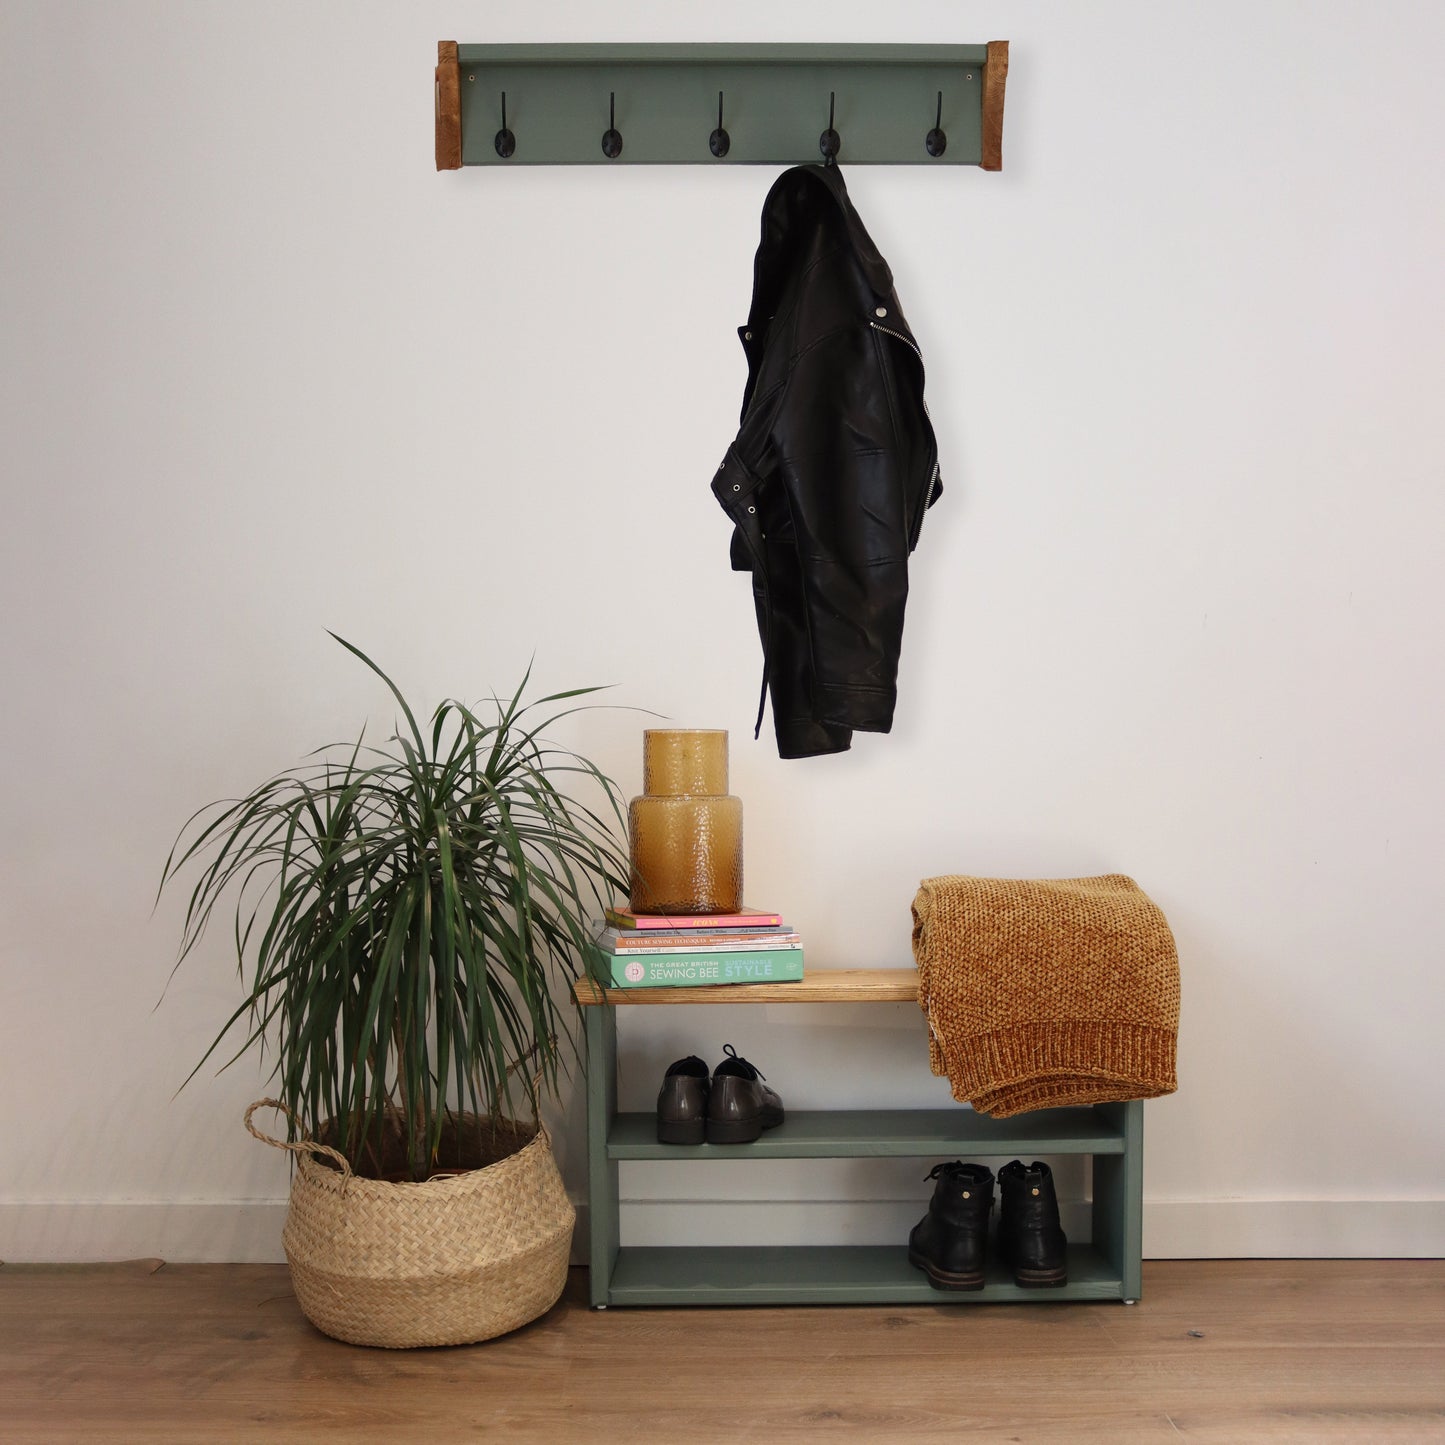 Coat Hook and Shoe Rack Storage Narrow 70 cm by 22 cm by 55 cm